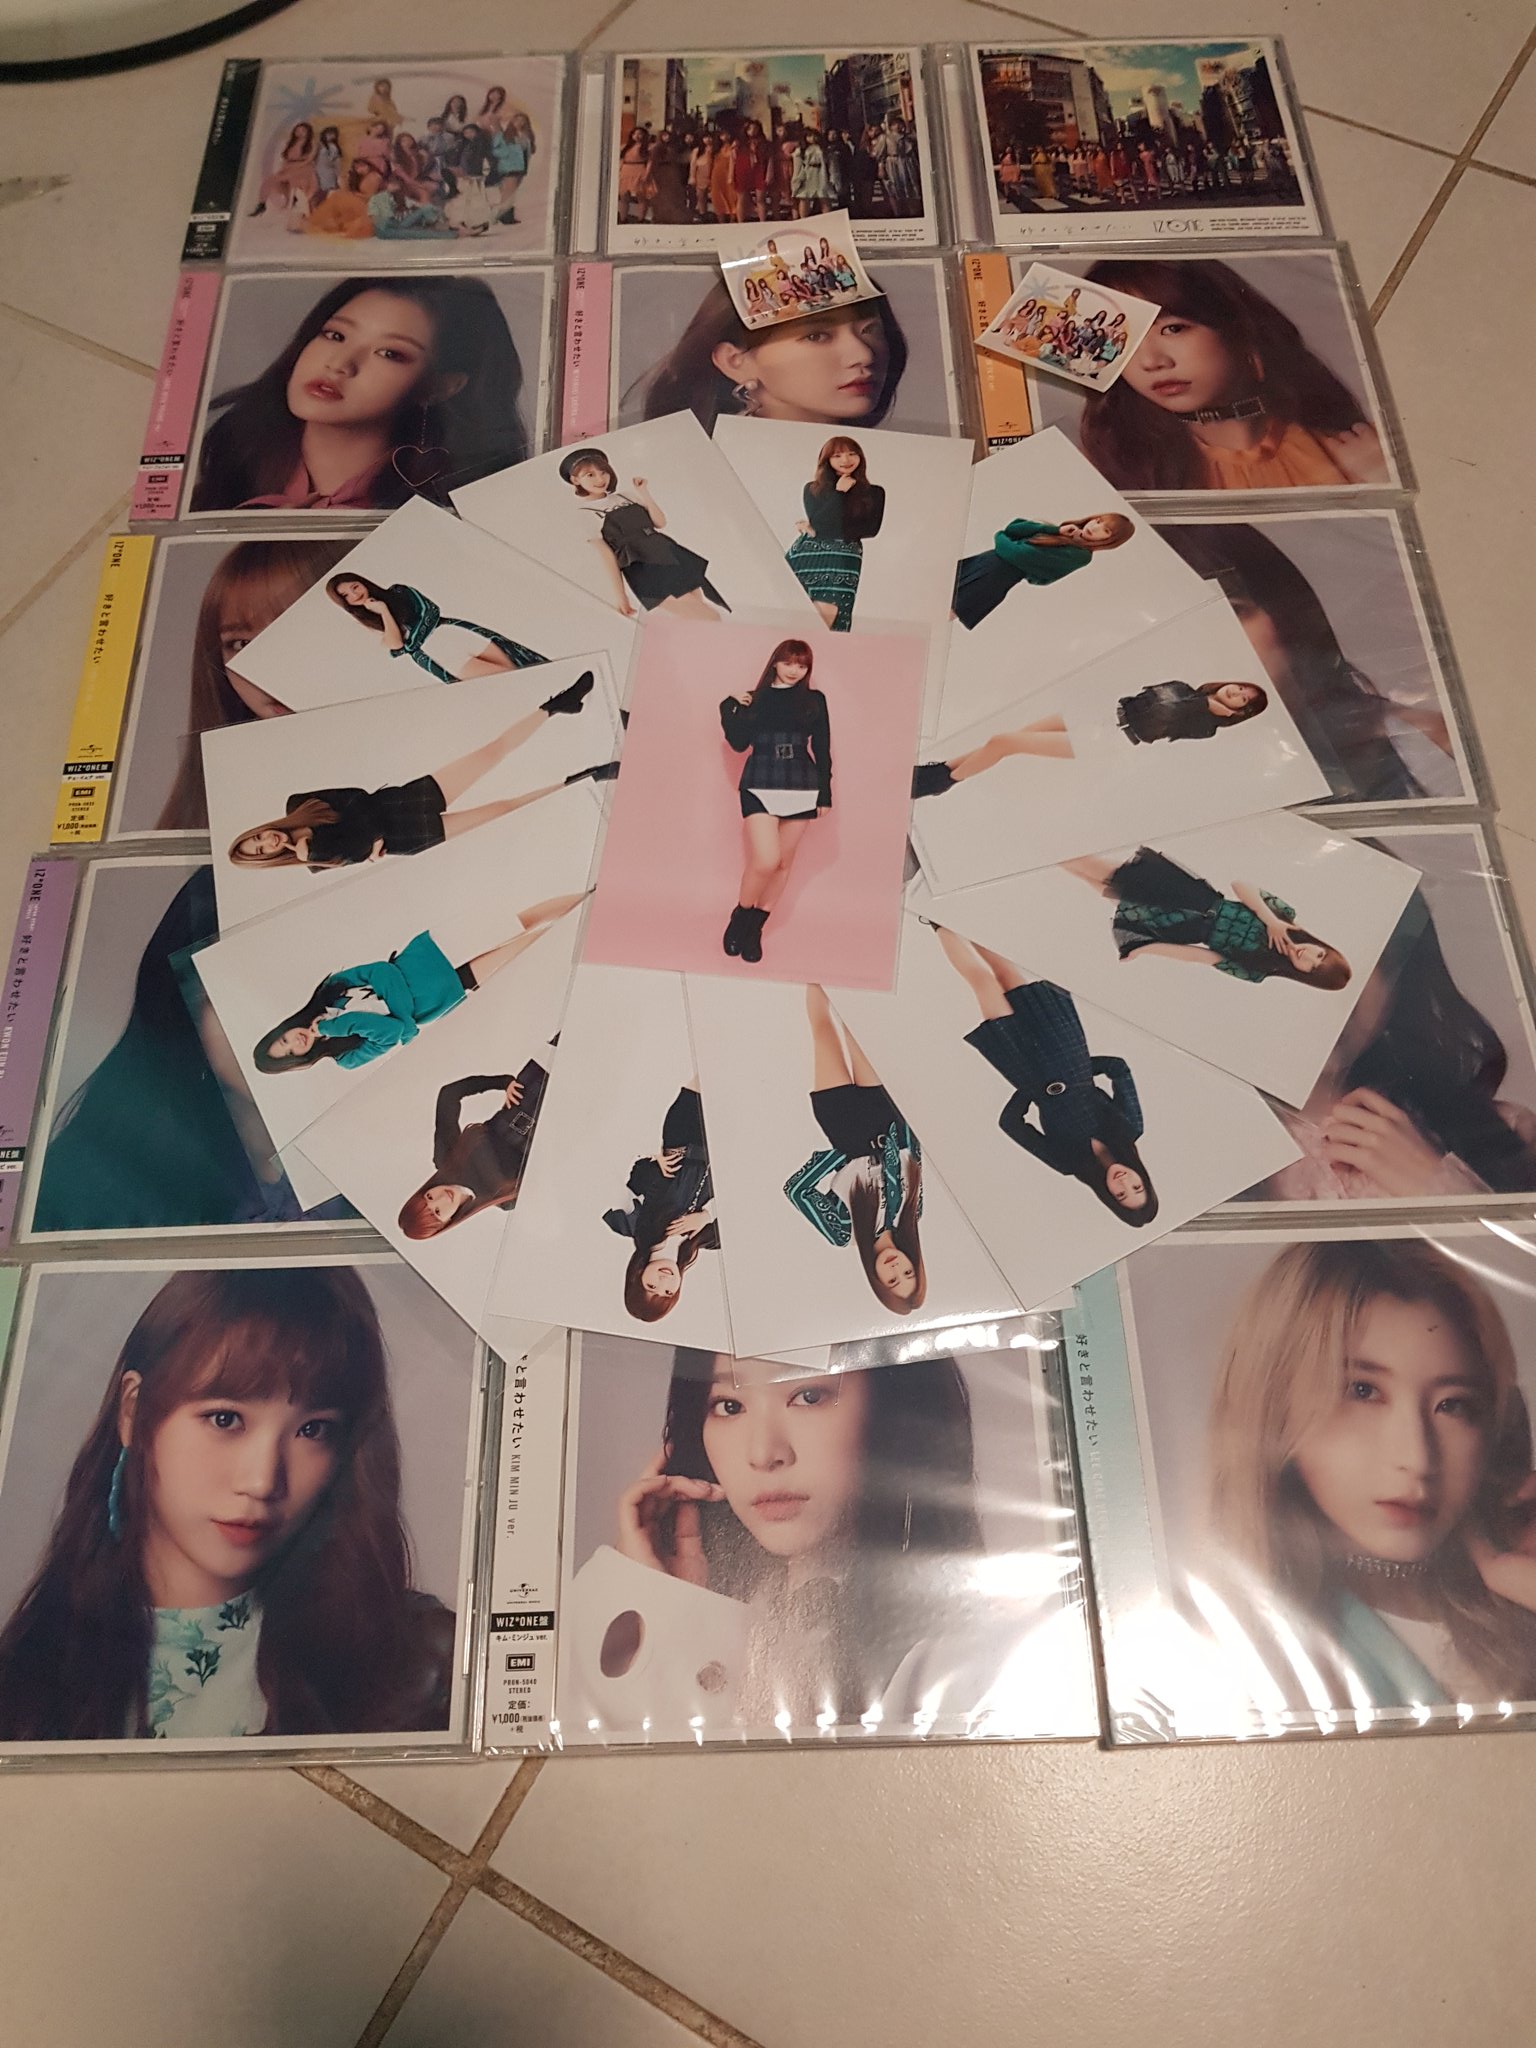 【Super Recommend】Transbang is one of the best service I have used for to get my IZ*ONE Suki To Iwasetai albums for my friends and I! 